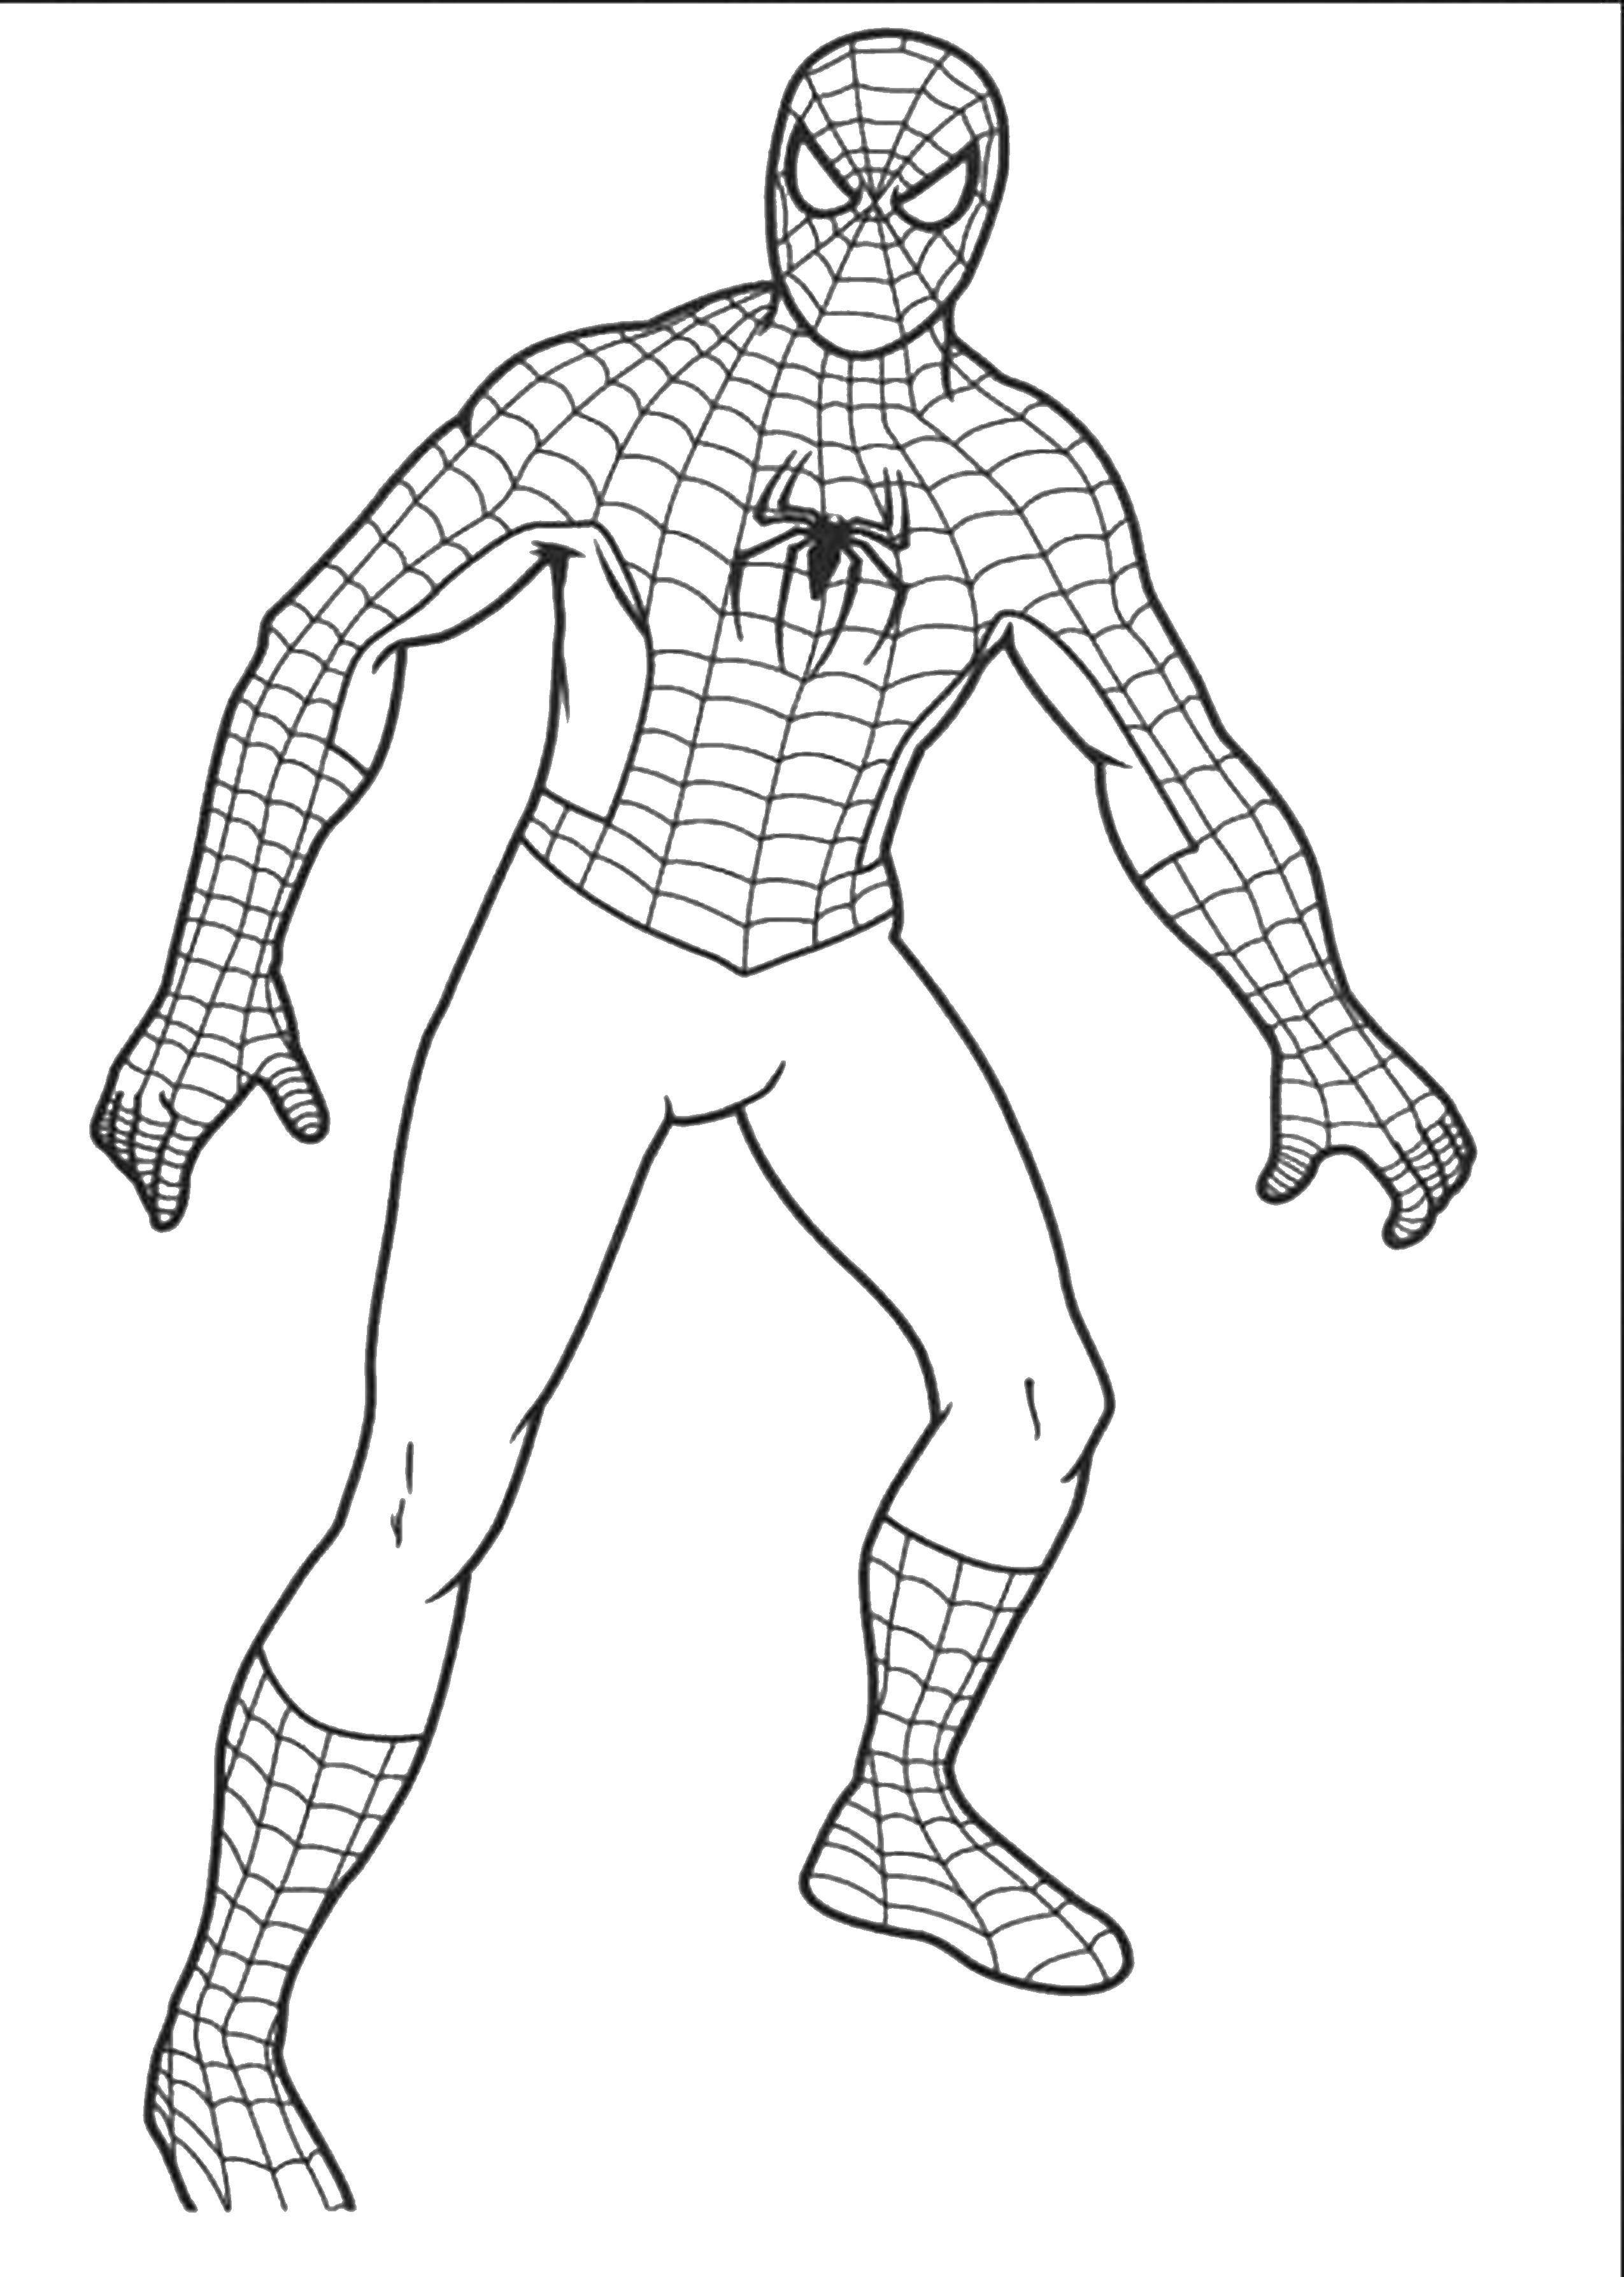 Coloring Spider-man. Category For boys . Tags:  spider man, superheroes.